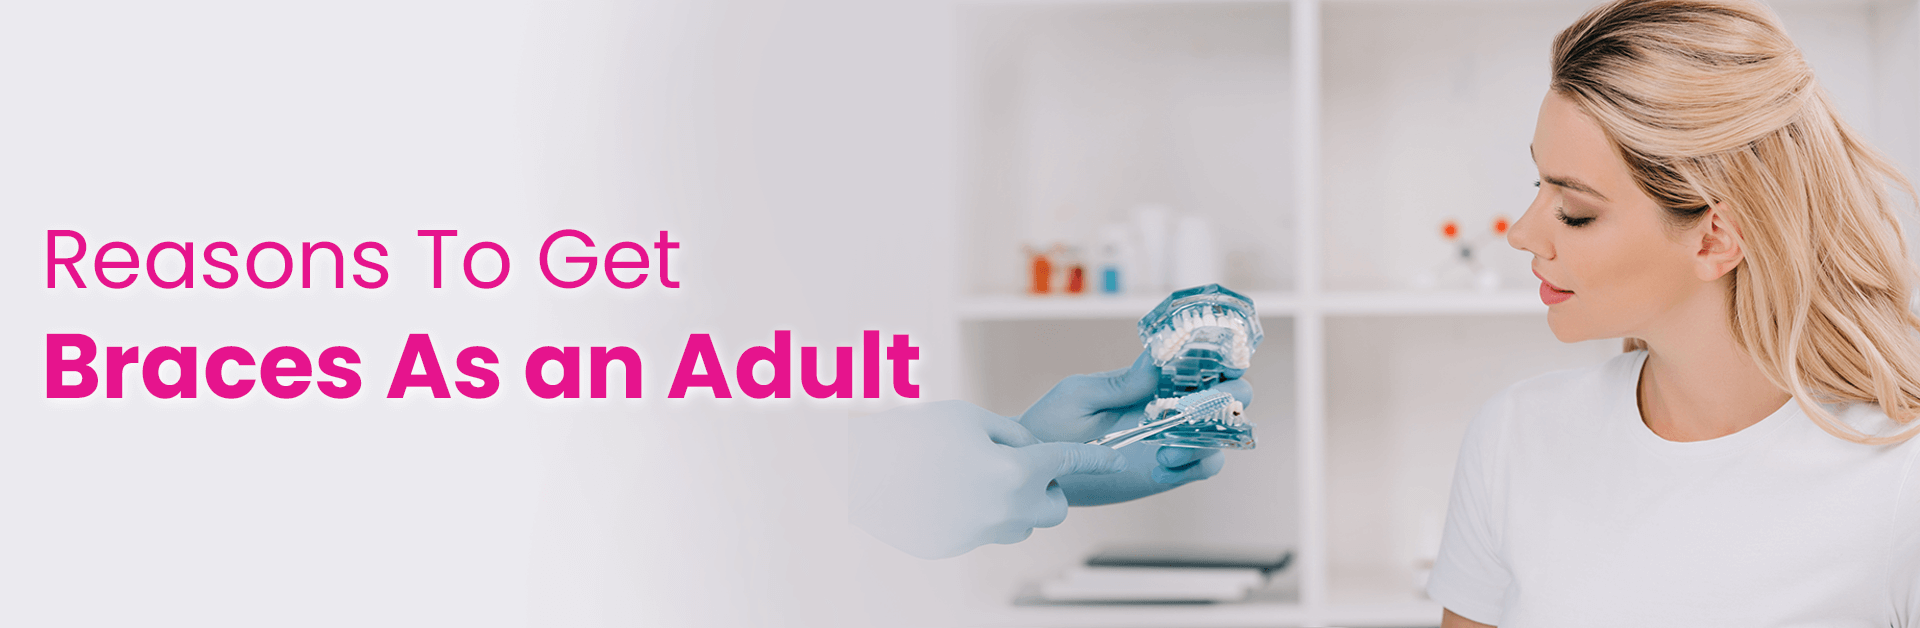 7 REASONS TO GET BRACES AS AN ADULT